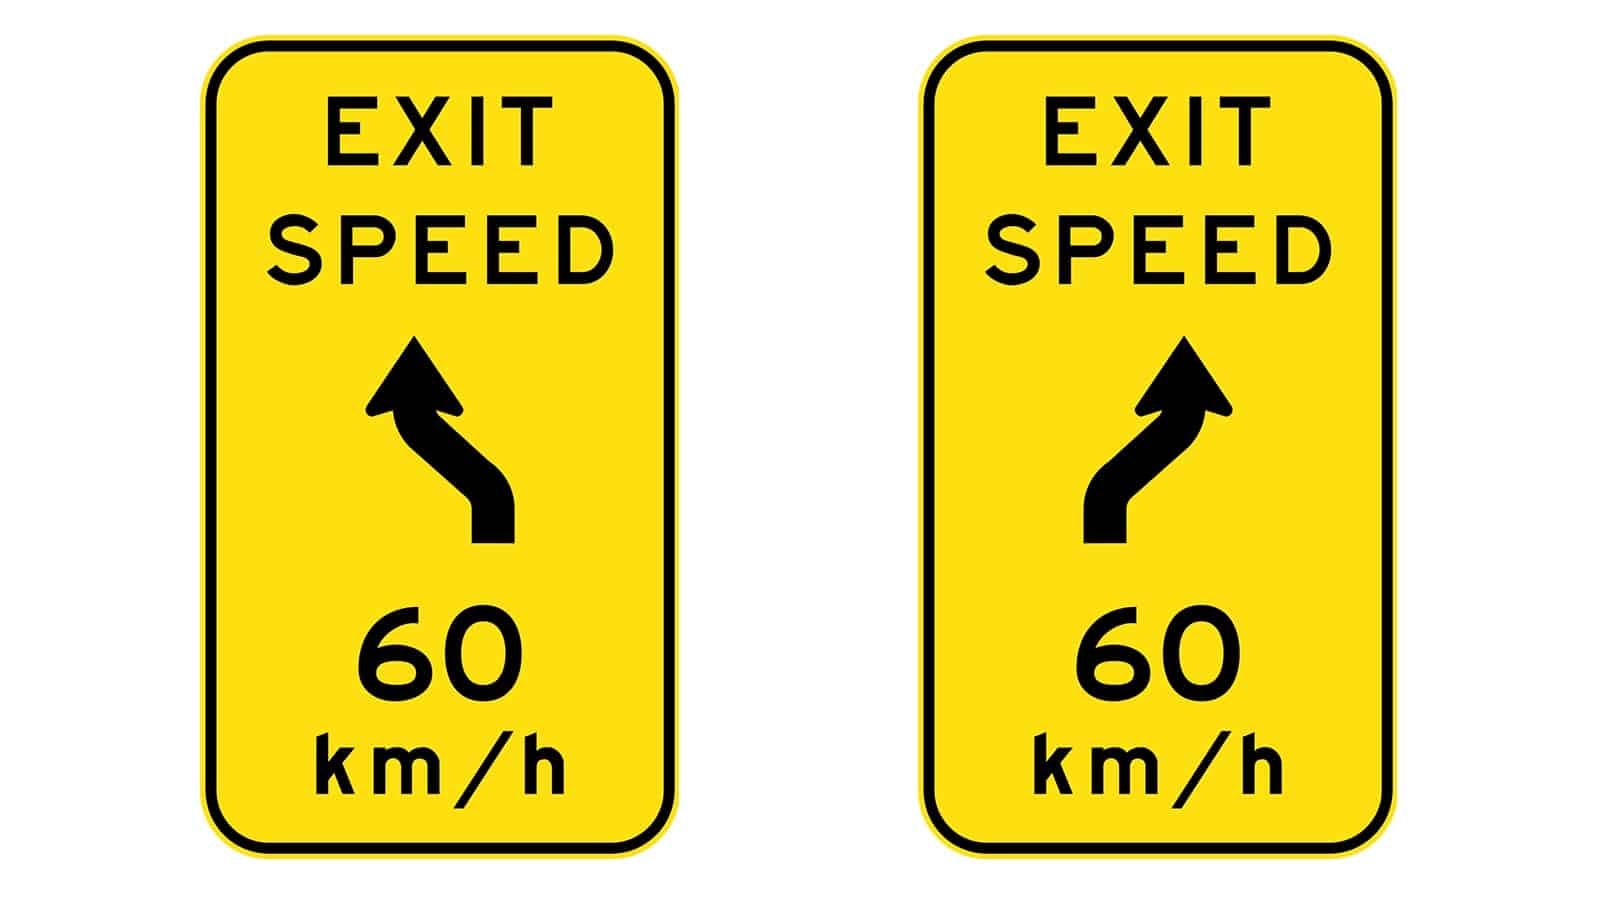 Exit Advisory Speed With Reverse Curve, First to Left : Right